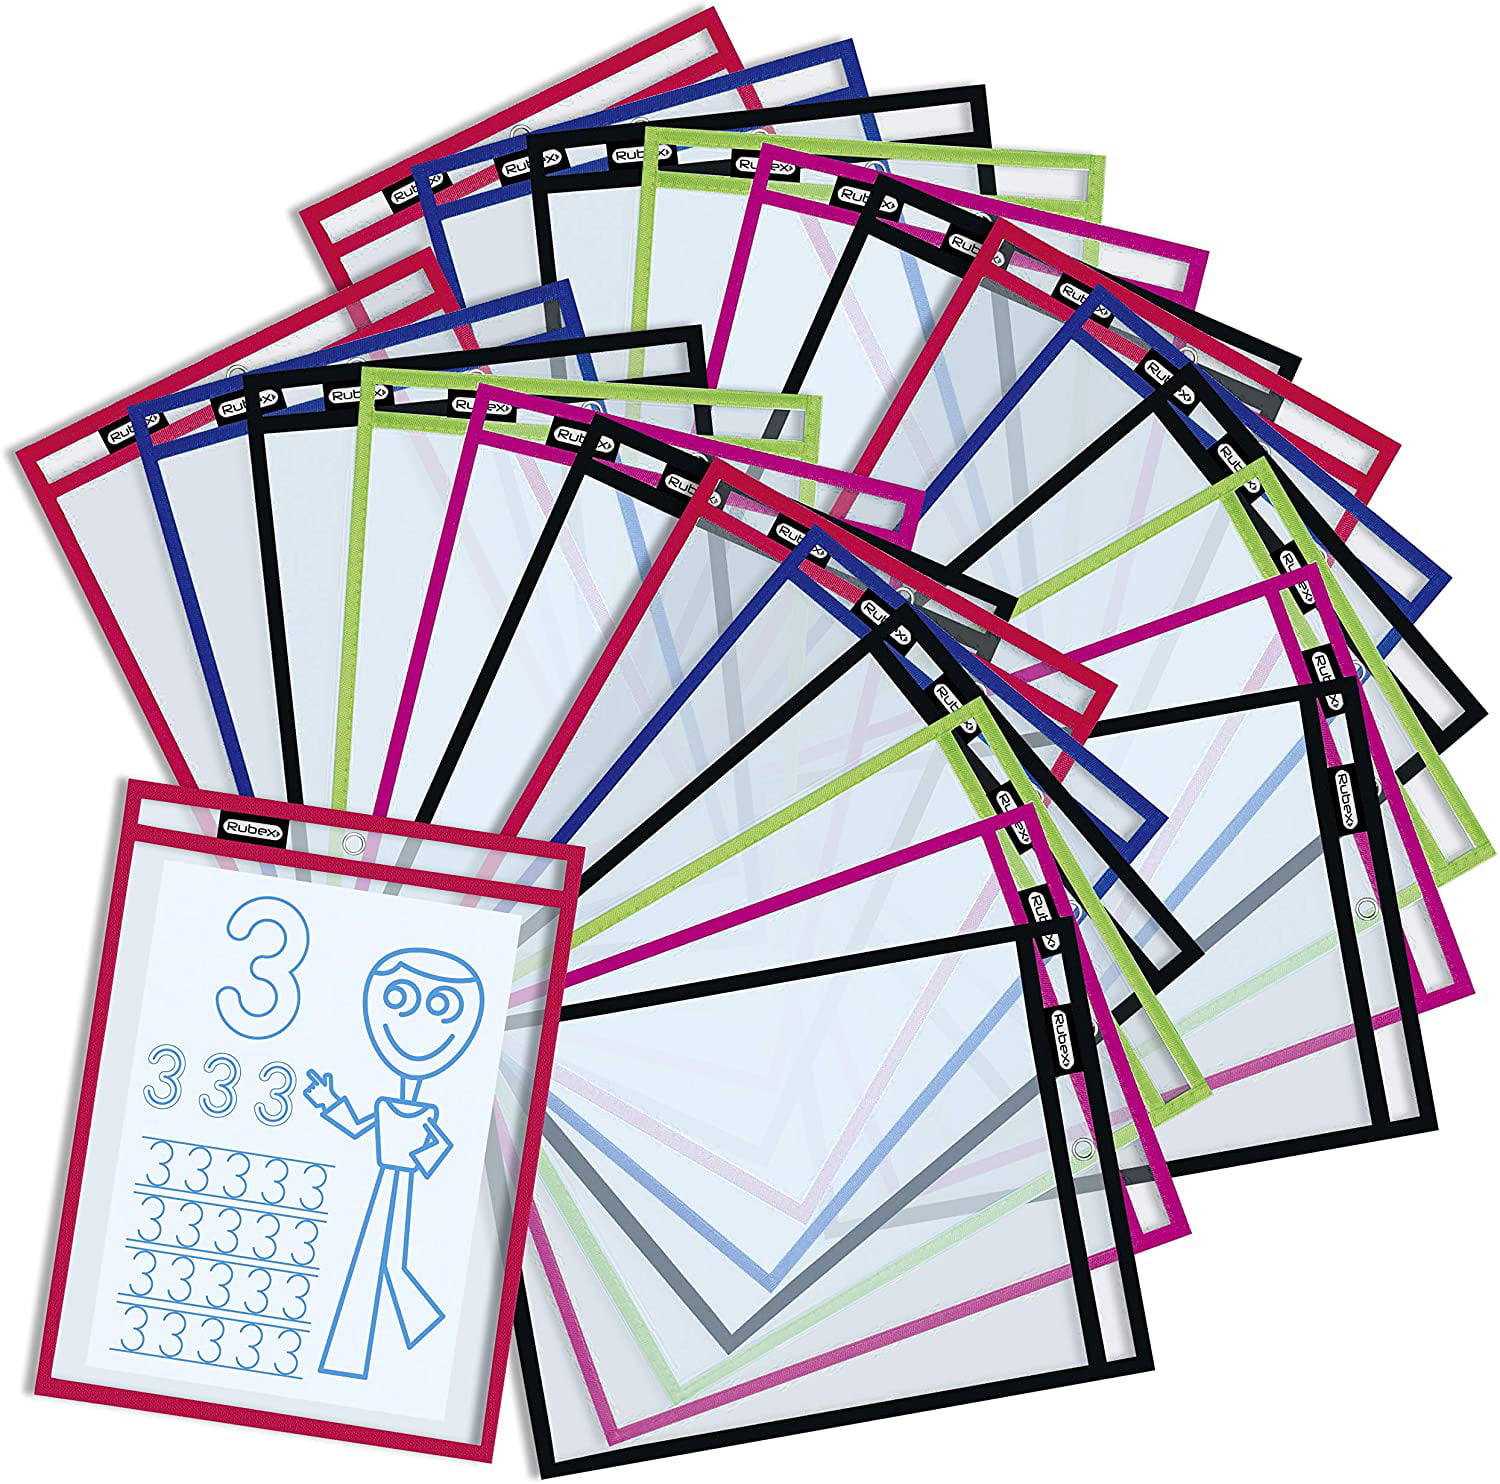 Teacher Supplies for Classroom Heavy Duty Oversized 10 x 14 Clear Plastic Sheet Protectors Nutsball Dry Erase Pockets Reusable Sleeves 30 Pack Job Ticket Holders Assorted Colors 